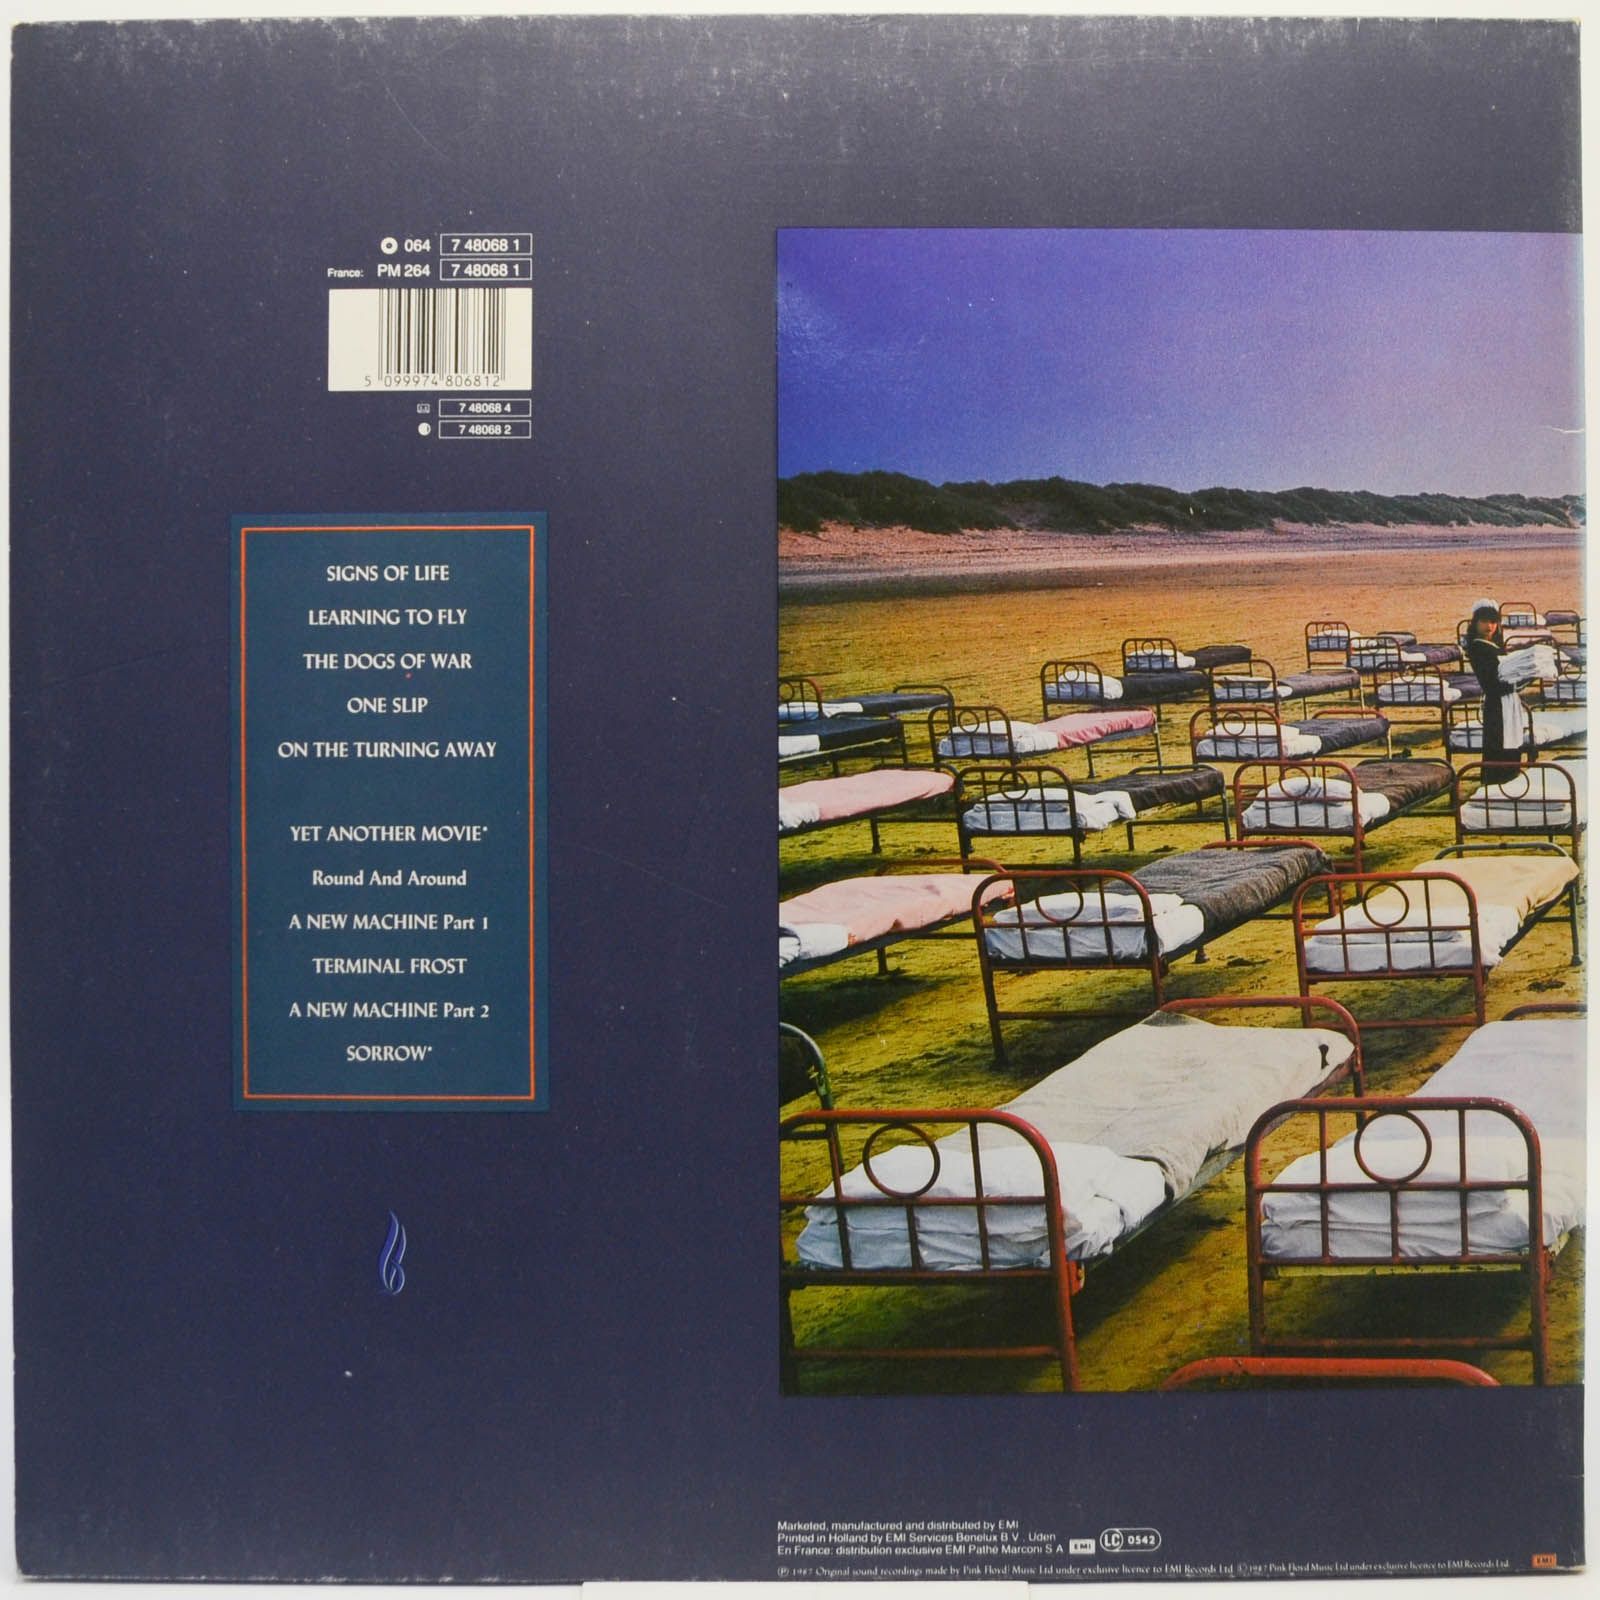 Pink Floyd — A Momentary Lapse Of Reason, 1987